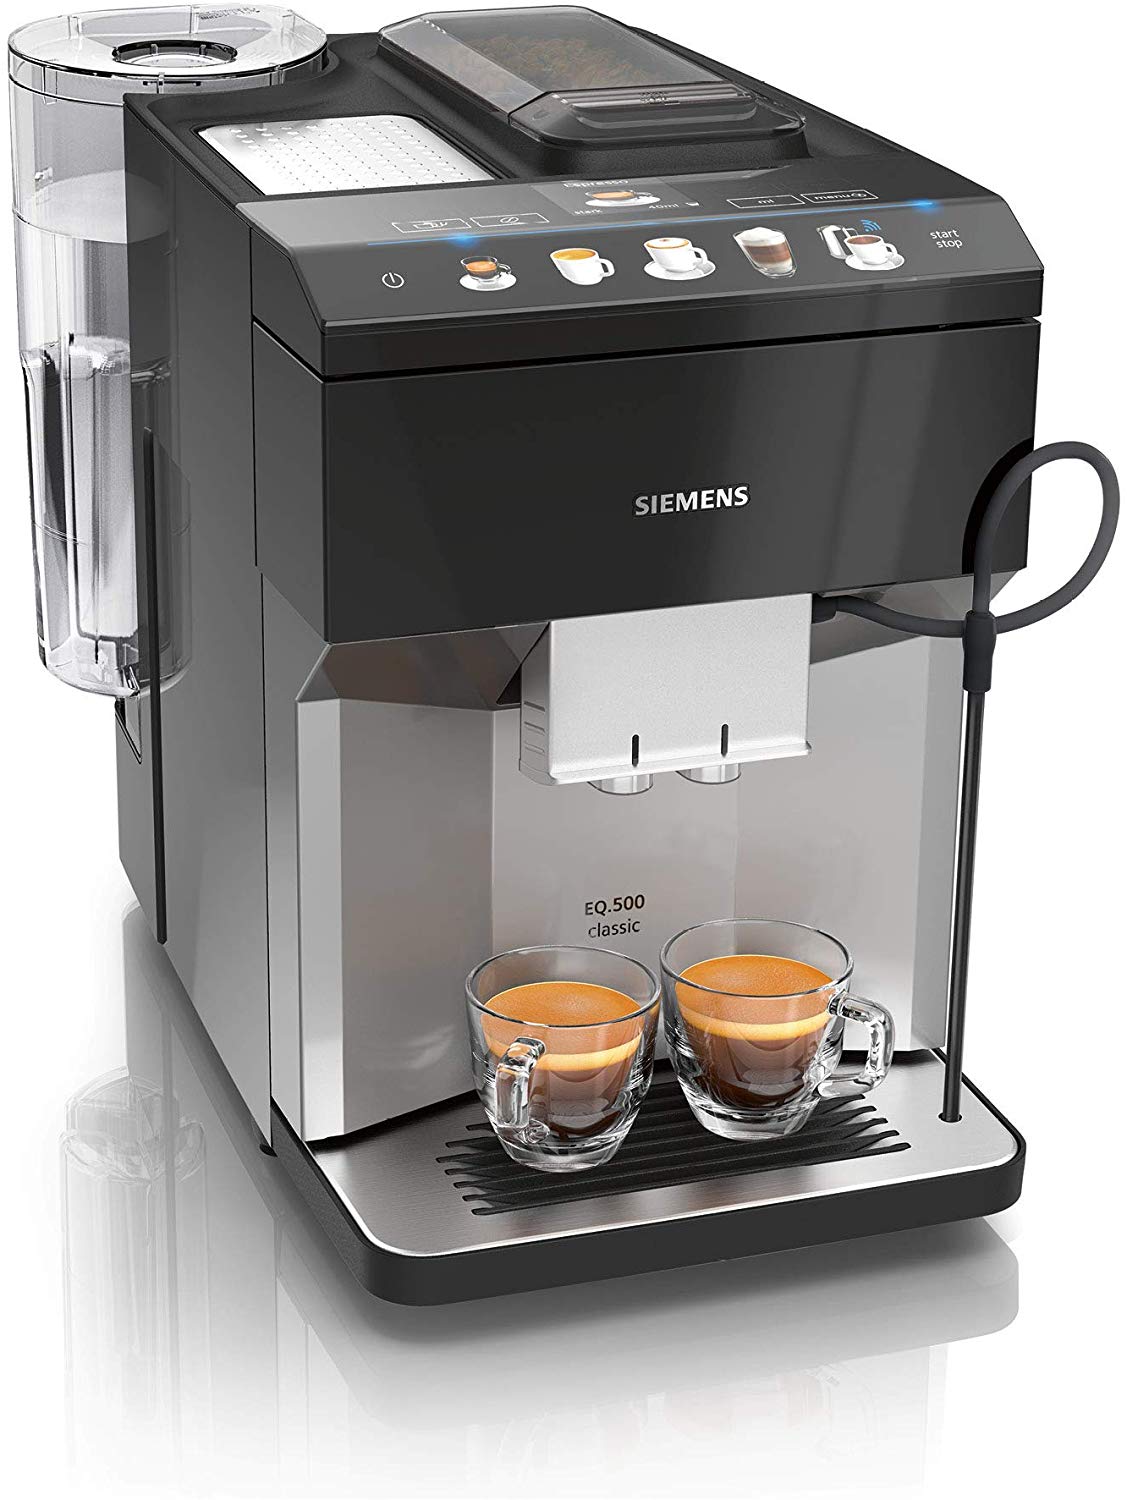 Siemens EQ.500 Integral Fully Automatic Coffee Machine, Easy To Use